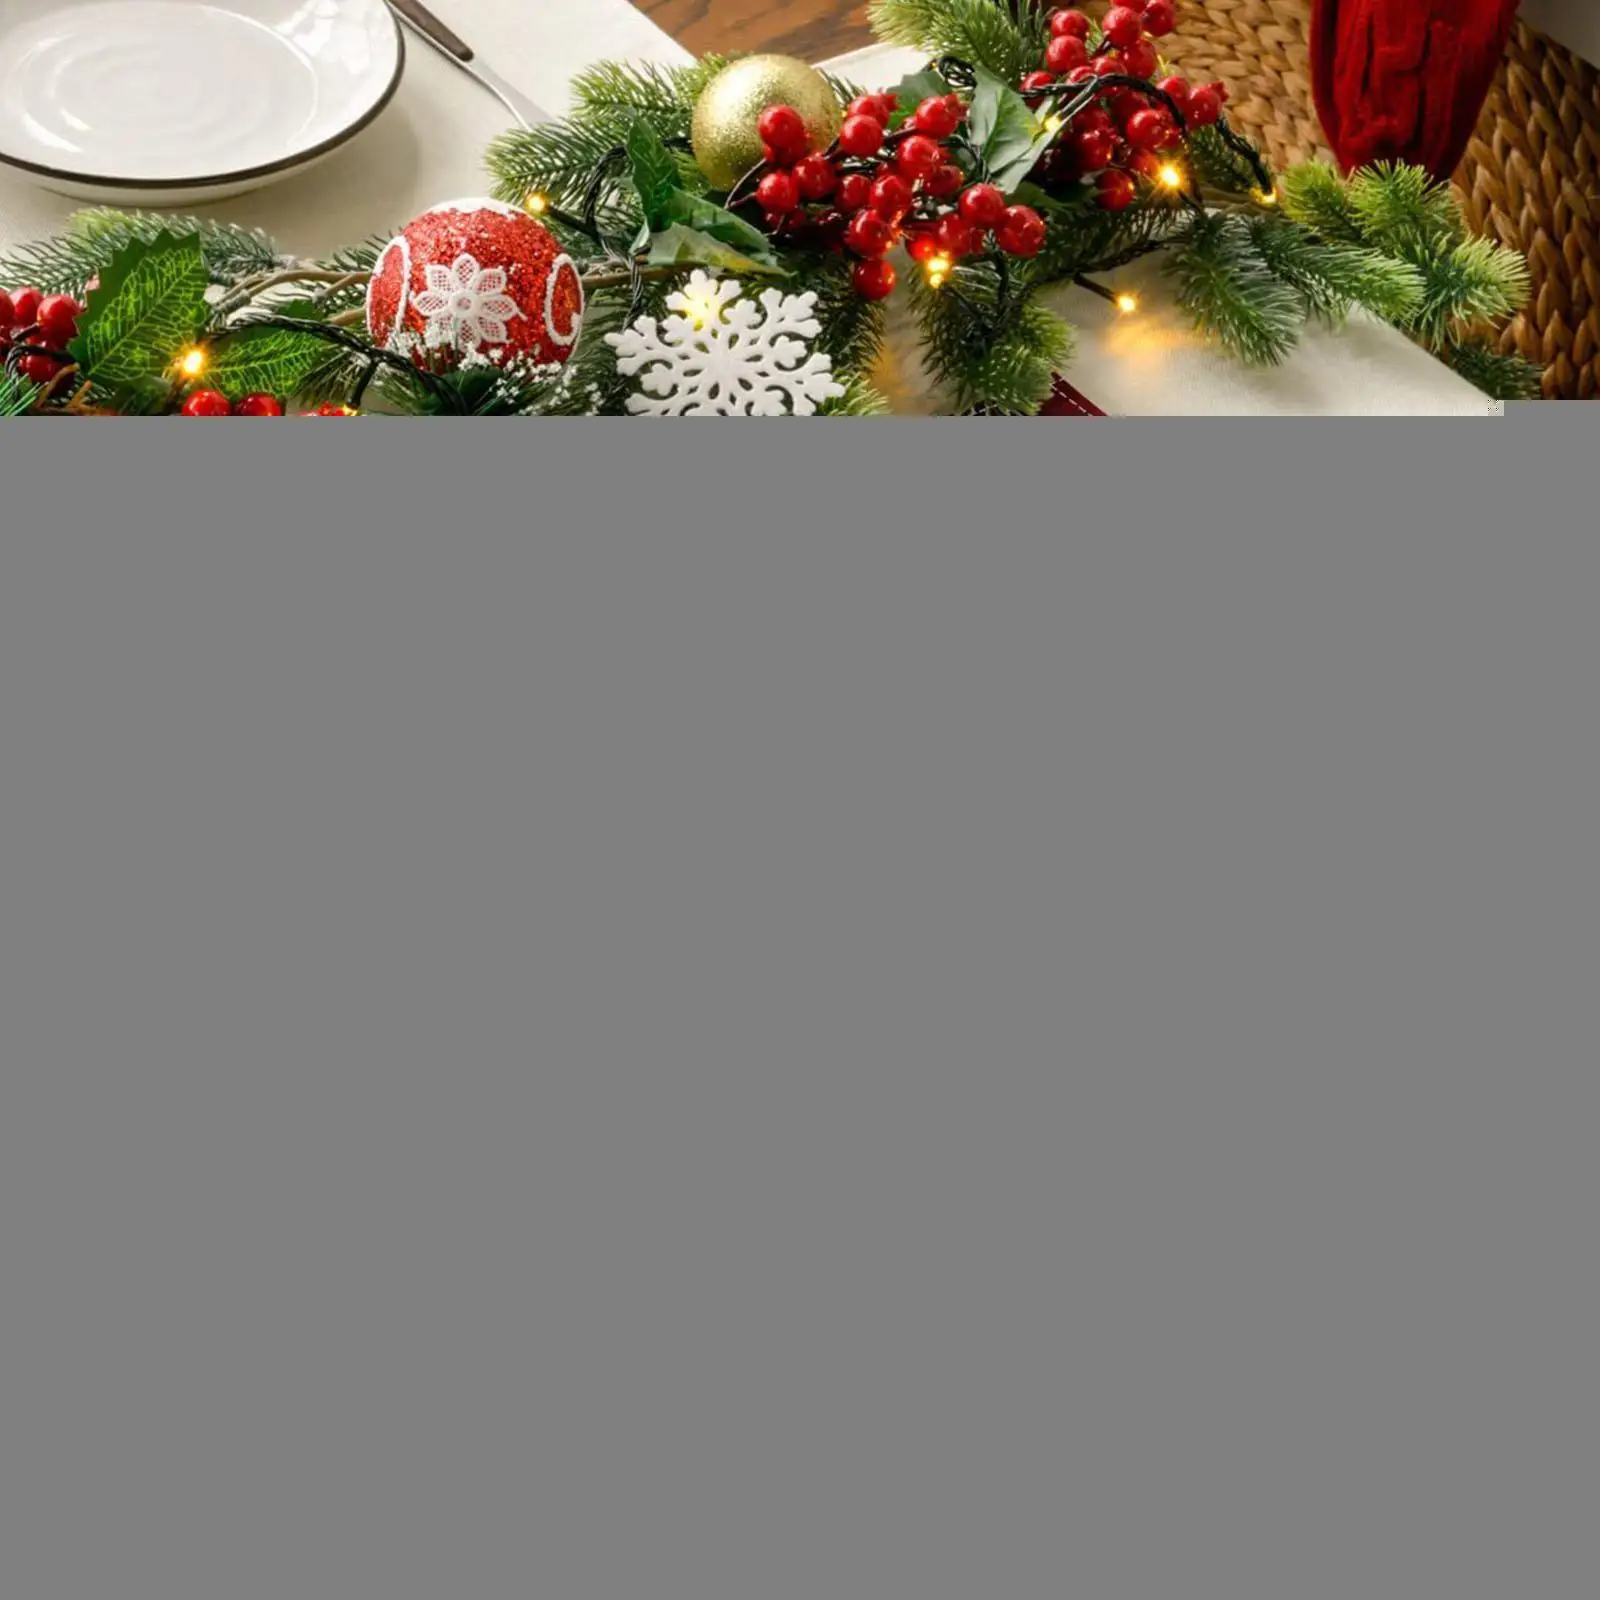 

Christmas Placemats New Red Black Plaid Placemats Reversible Heat-resistant Santa Claus Place Mat For Christmas Home Decora I8j6